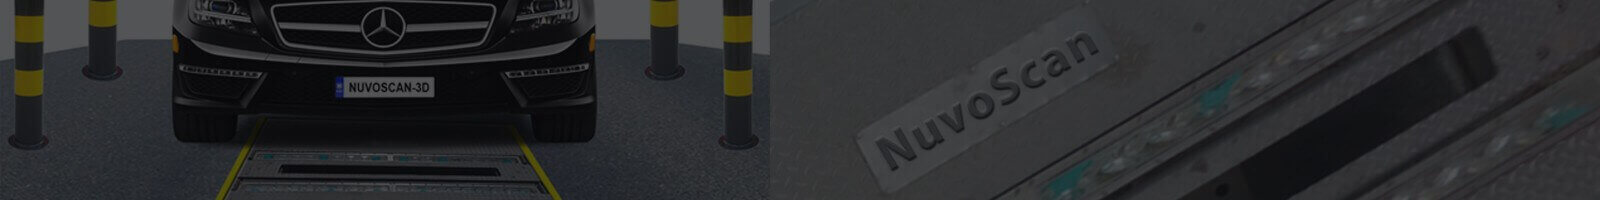 NuvoScan®  3D - Automated Under Vehicle Scanning System